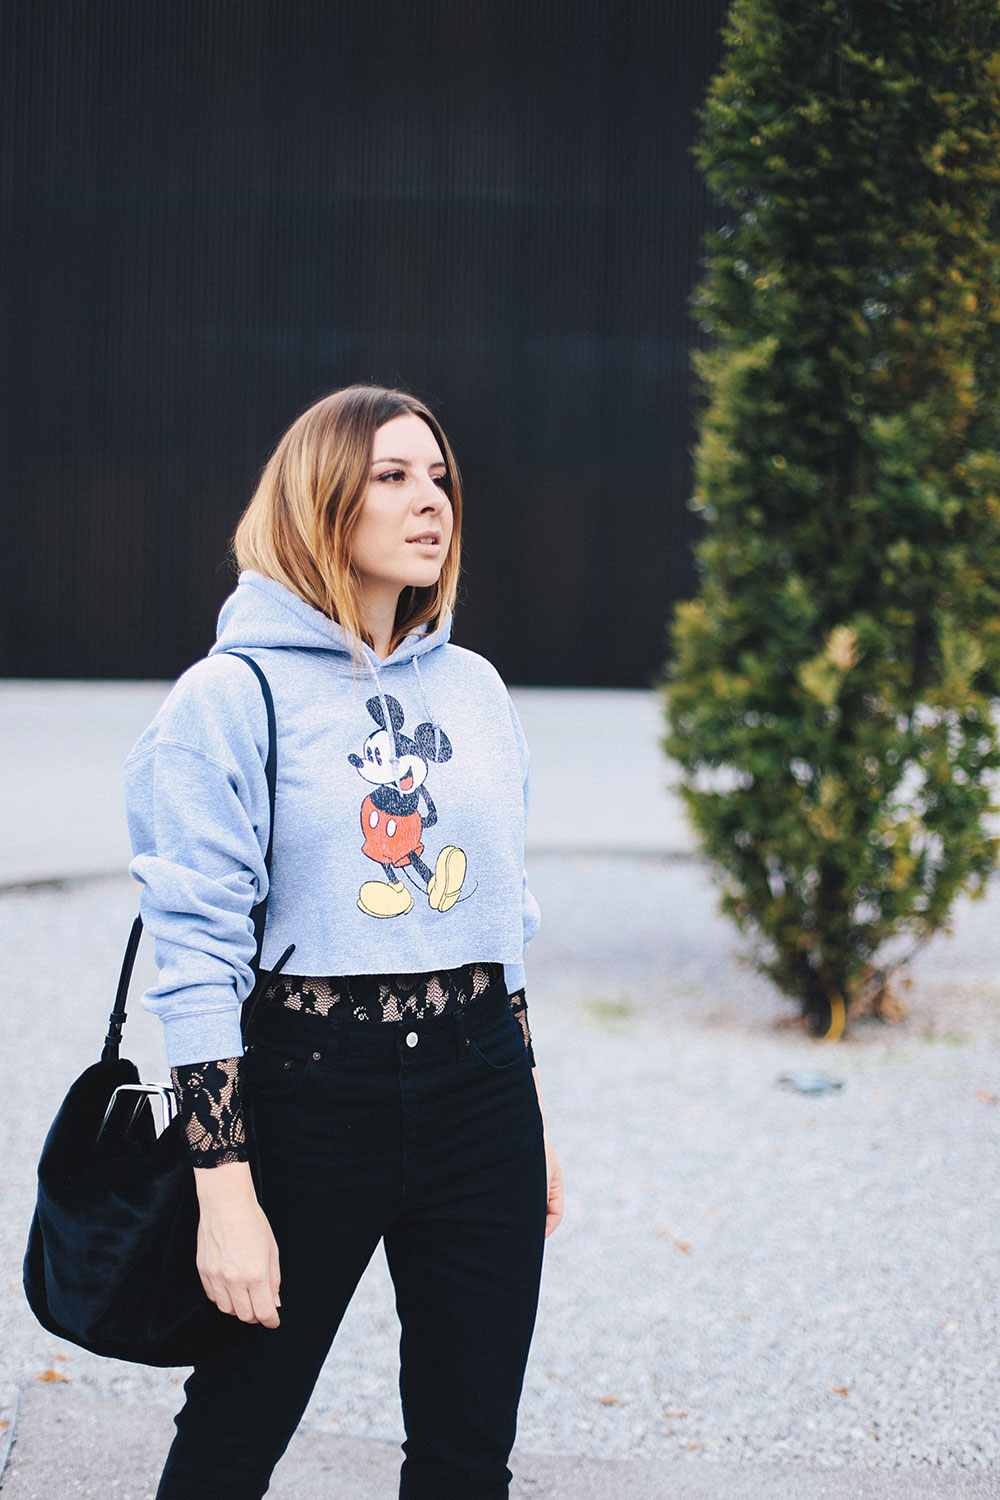 Cropped Mickey Mouse Pullover, Spitzenbody, Mom Jeans, Tasche aus Webpelz, cropped Kapuzenpullover, Streetstyle, Fashion Blog, Mode Blog, whoismocca.com